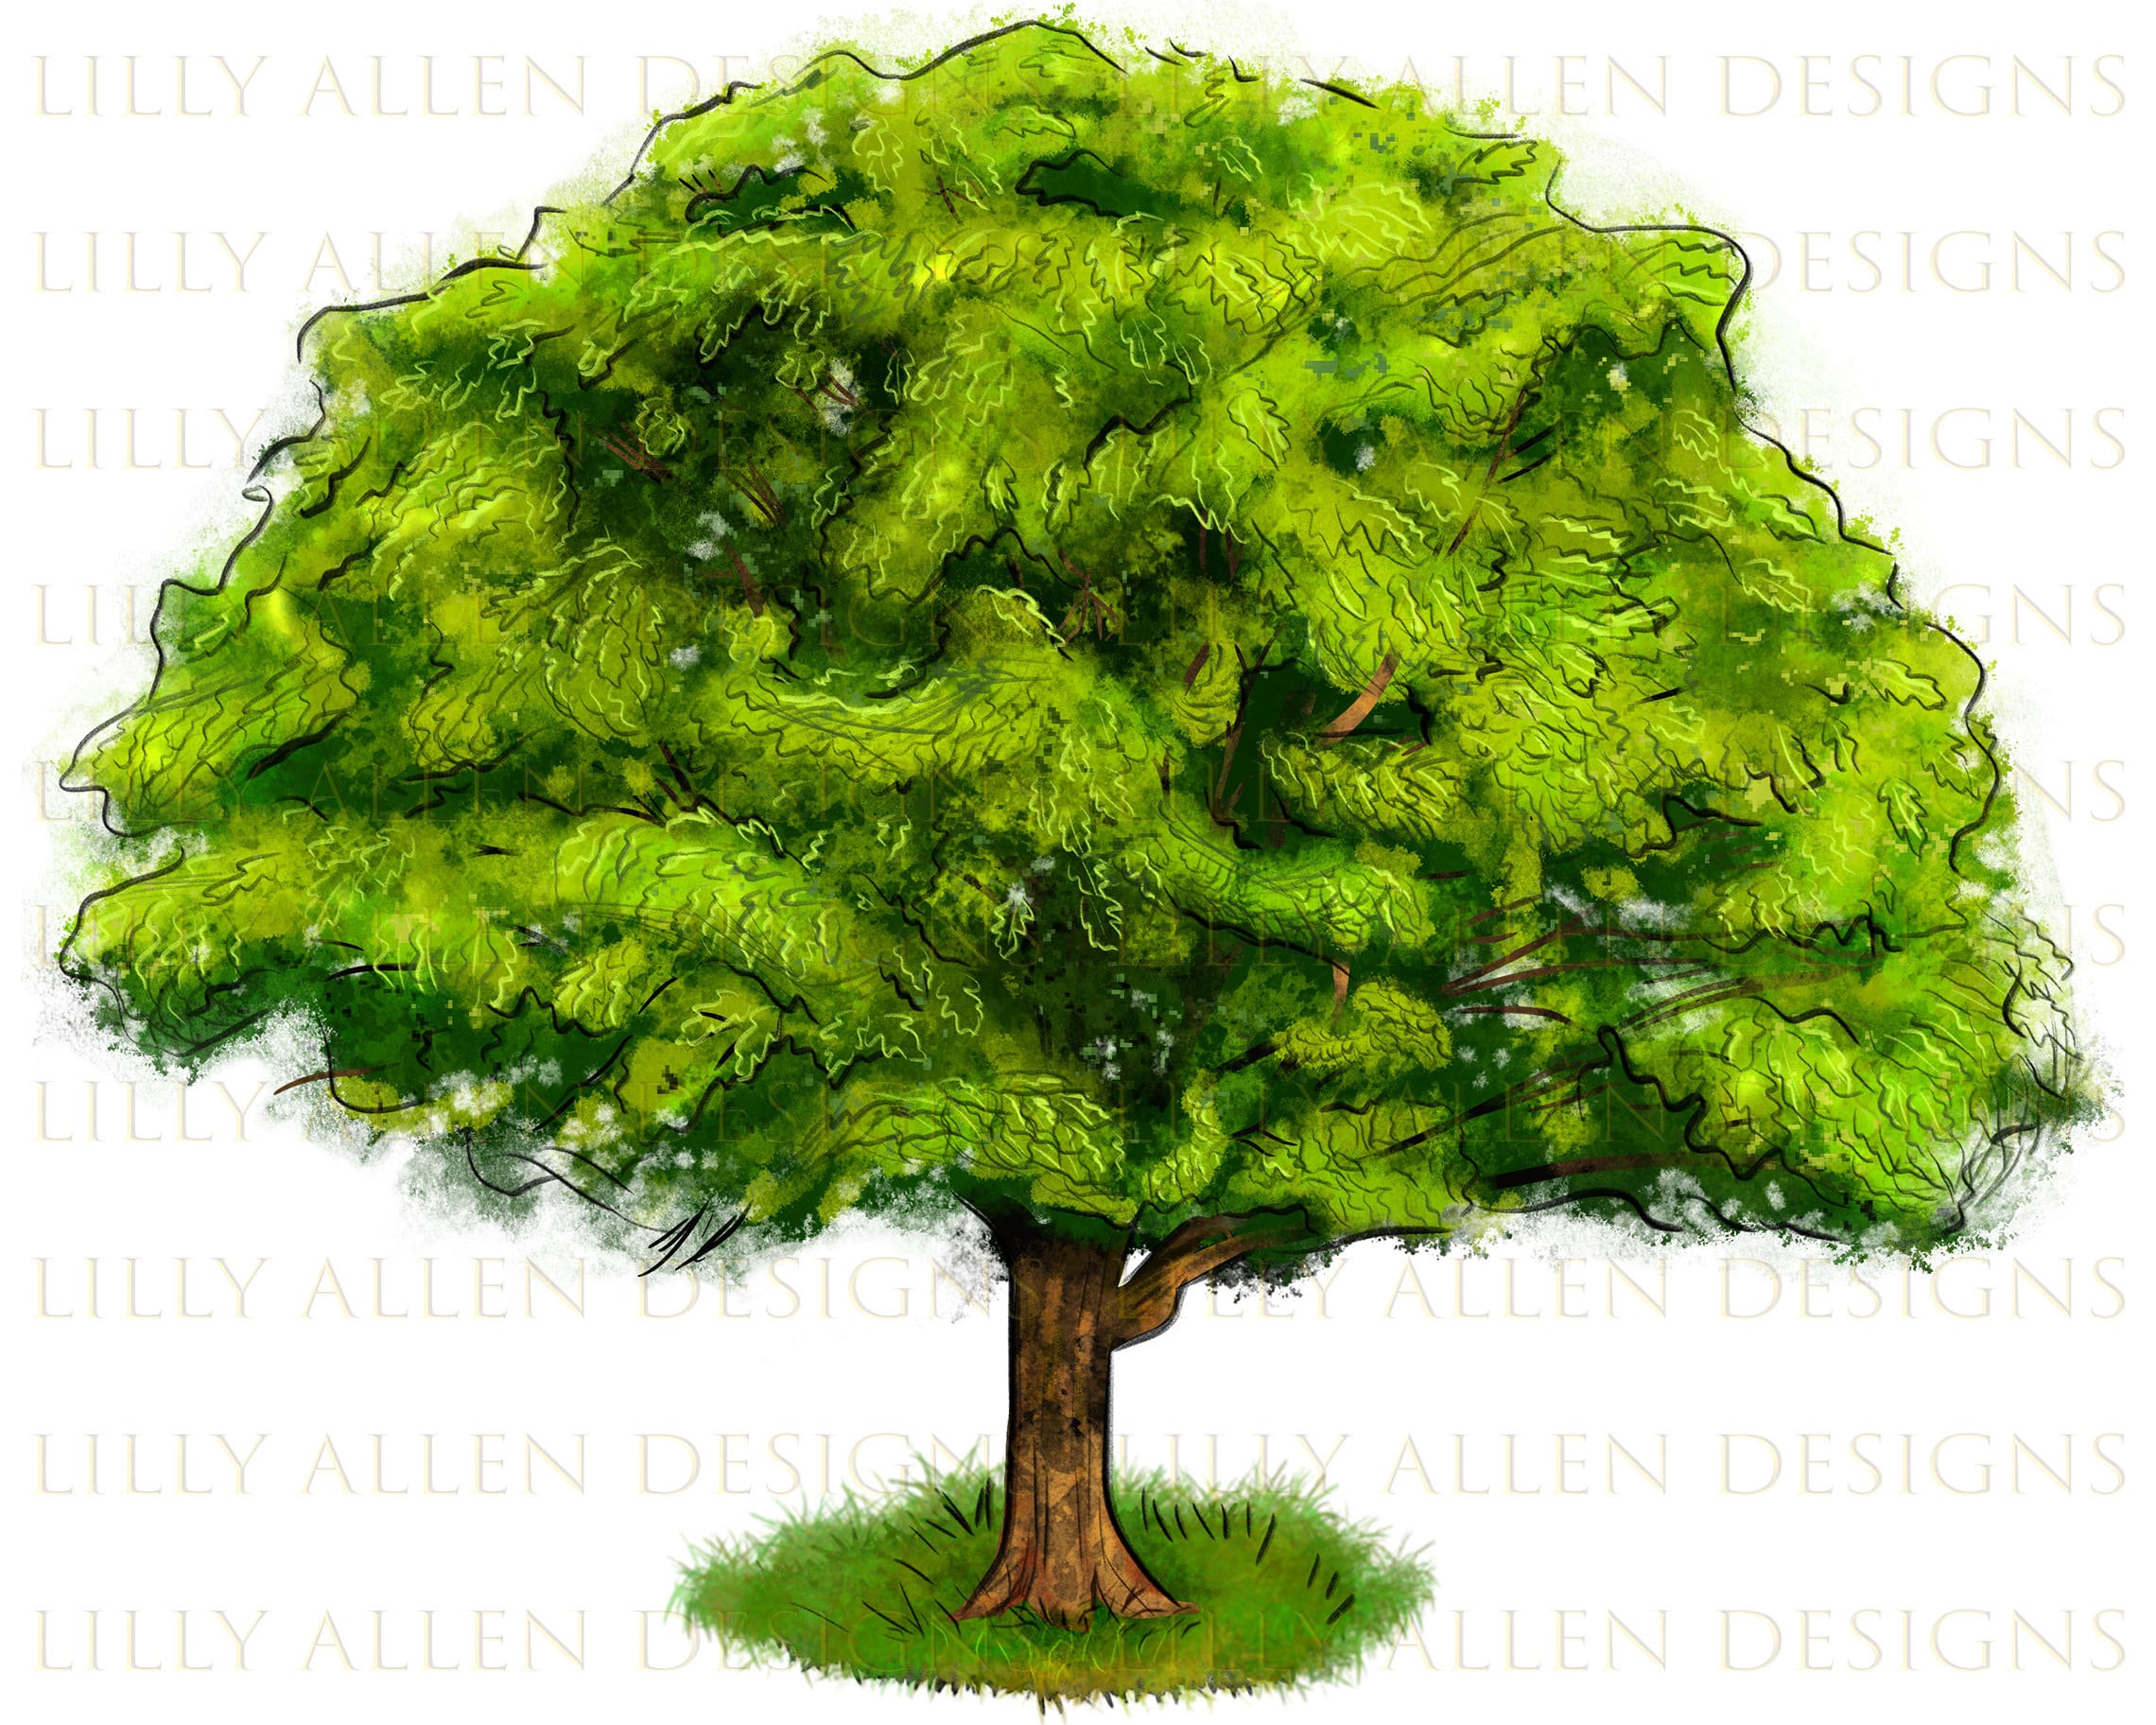 Realistic Tree Stickers By Recollections™